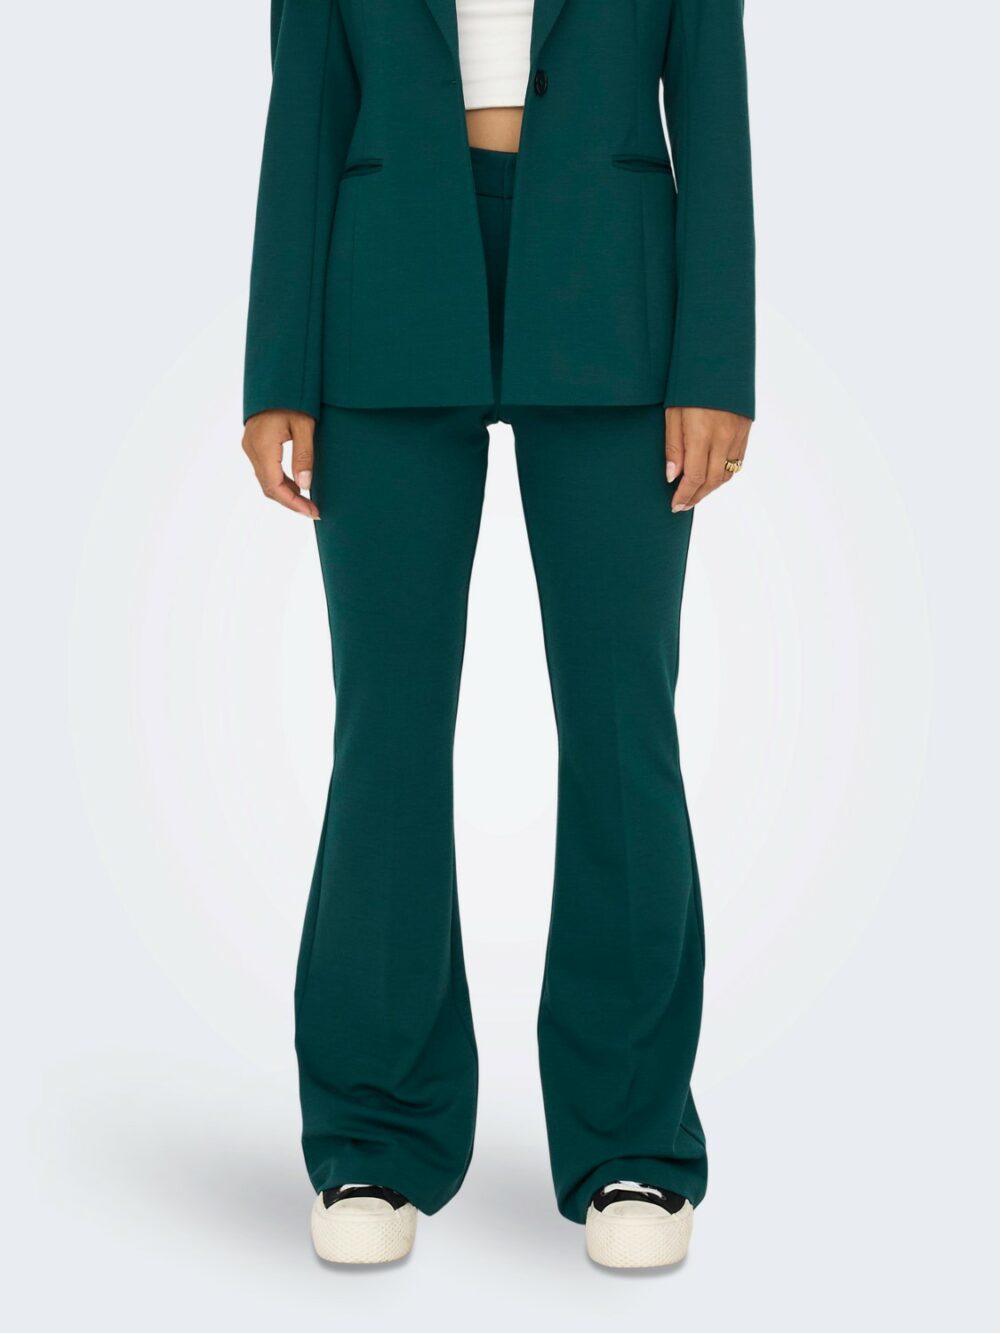 Pantaloni a sigaretta Only onlpeach mw flared pant tlr noos Verde - Foto 1